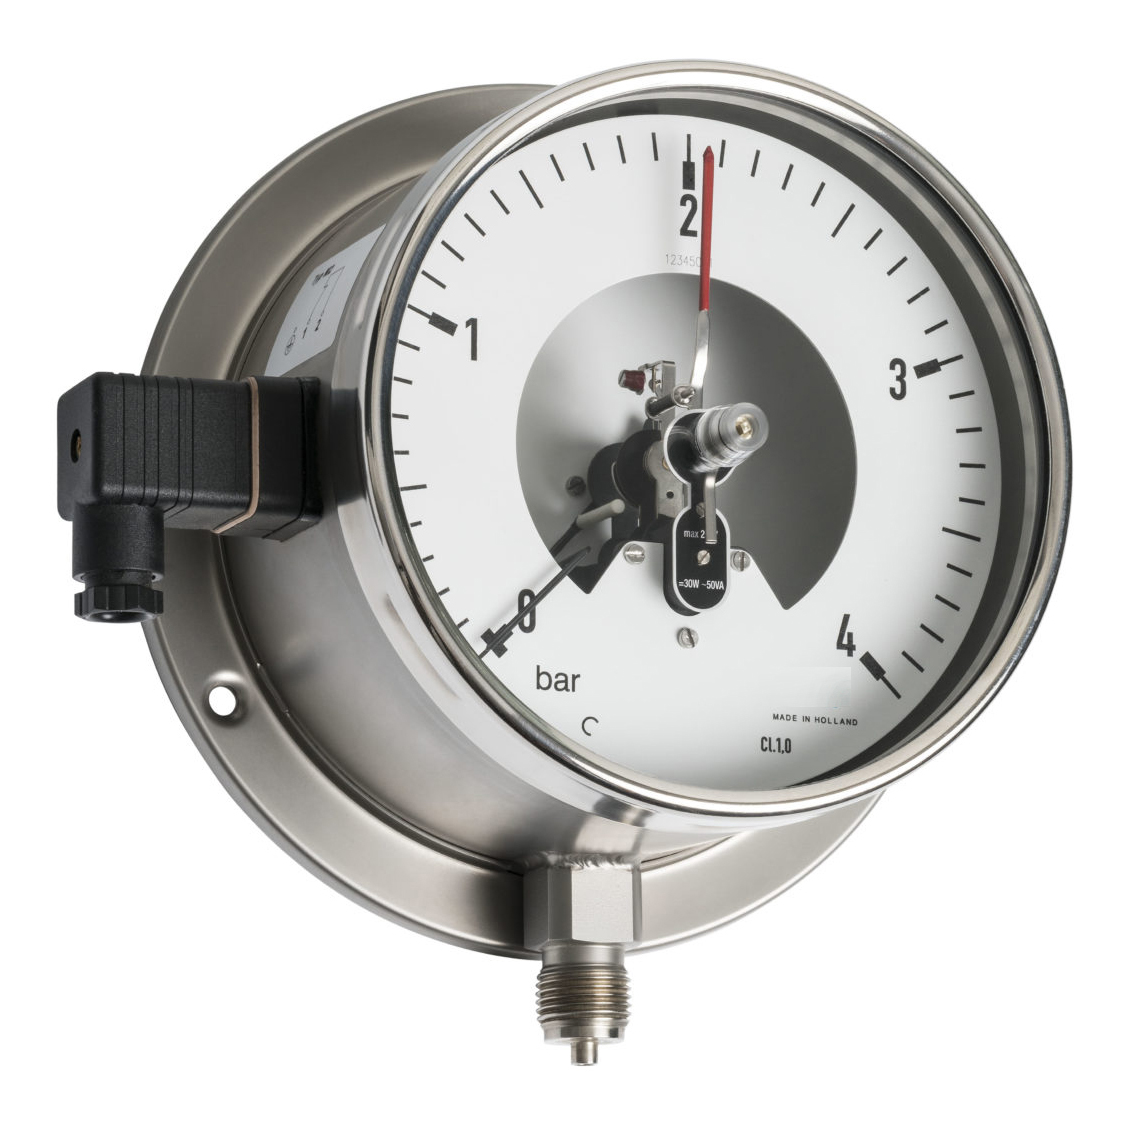 PBB Duplex gauge with double measuring system